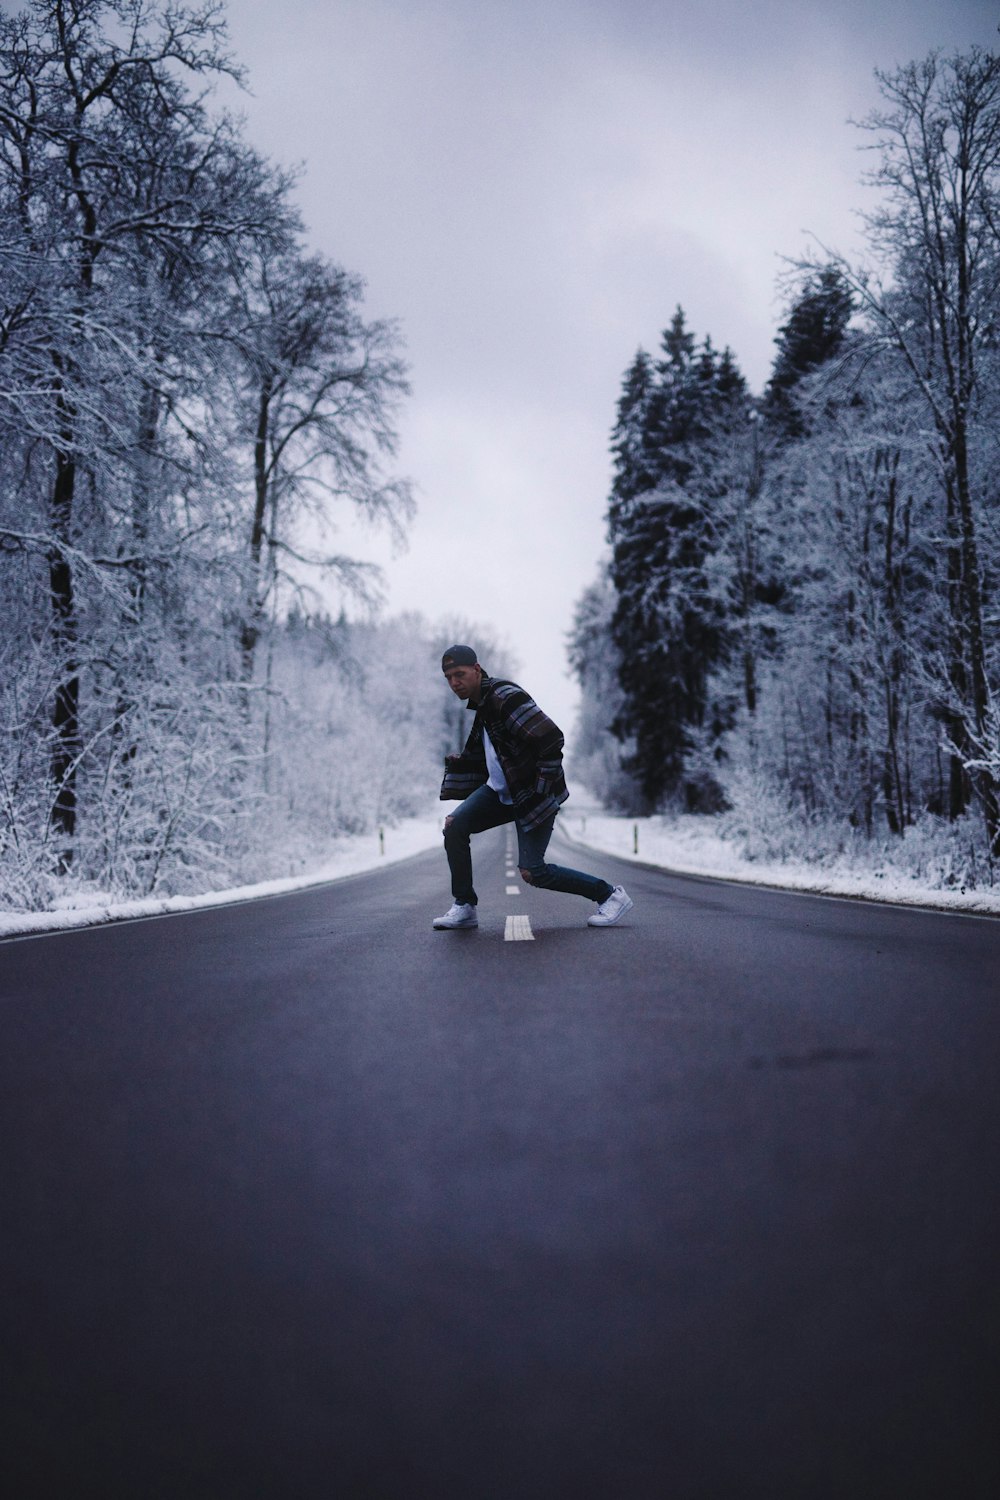 man in black jacket and blue denim jeans riding on black skateboard on snow covered road